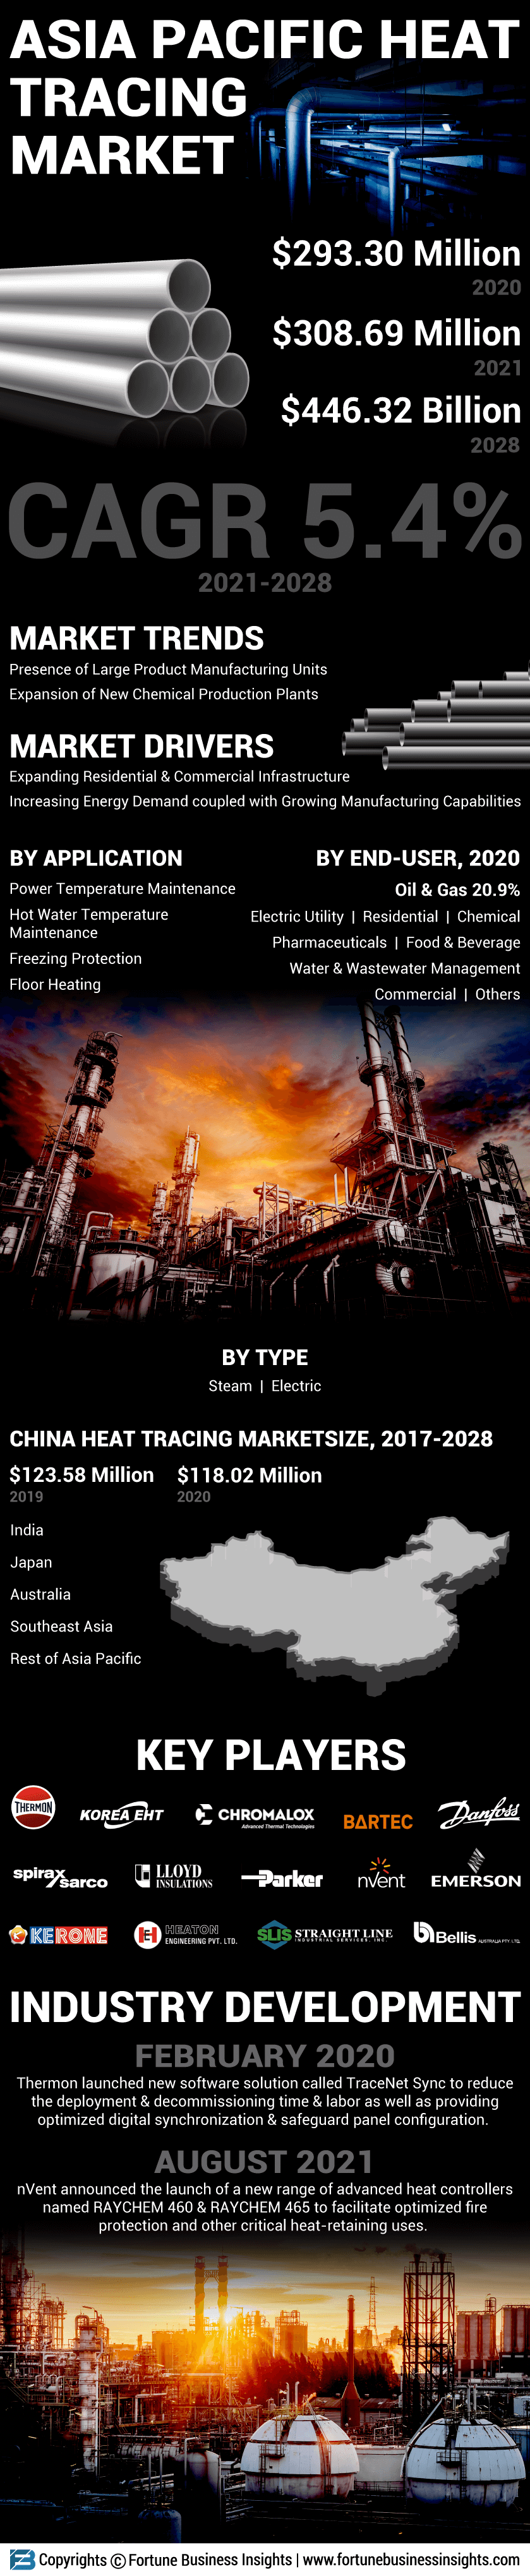 Asia Pacific Heat Tracing Market